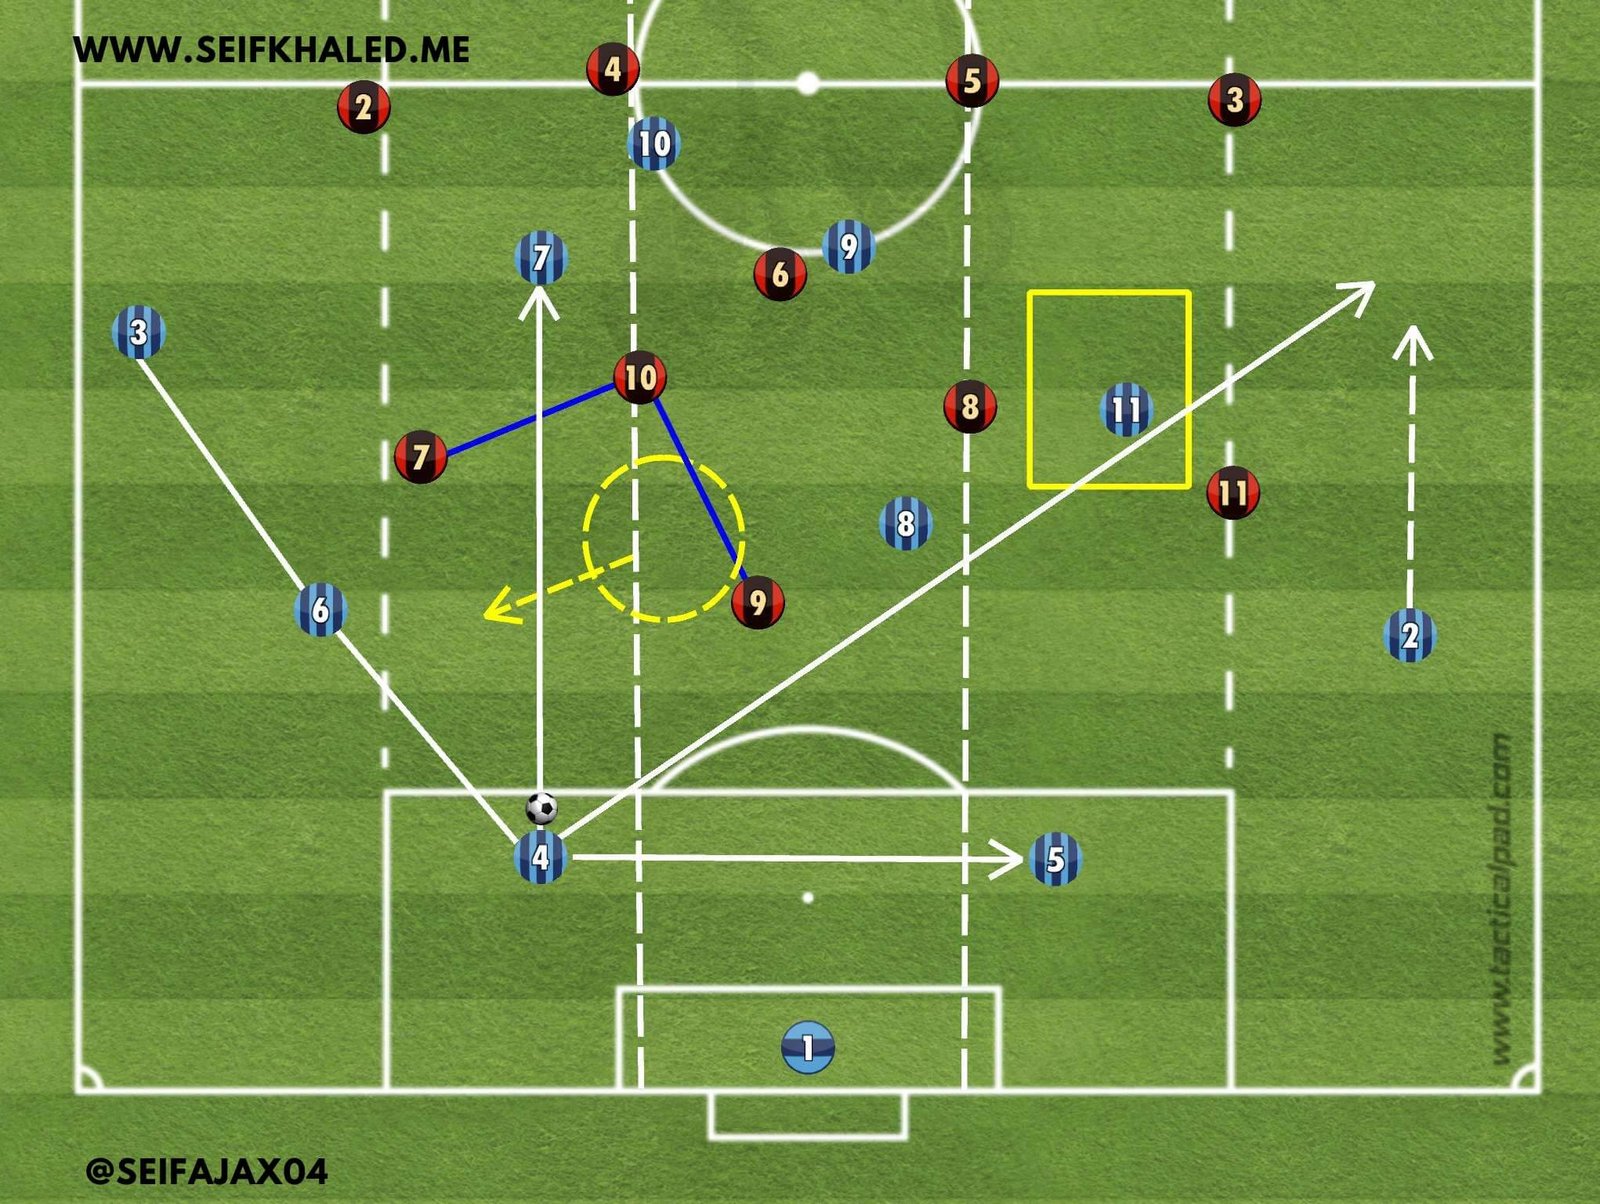 BUILDING THE ATTACK FROM DEEP IN A 4-2-2-2